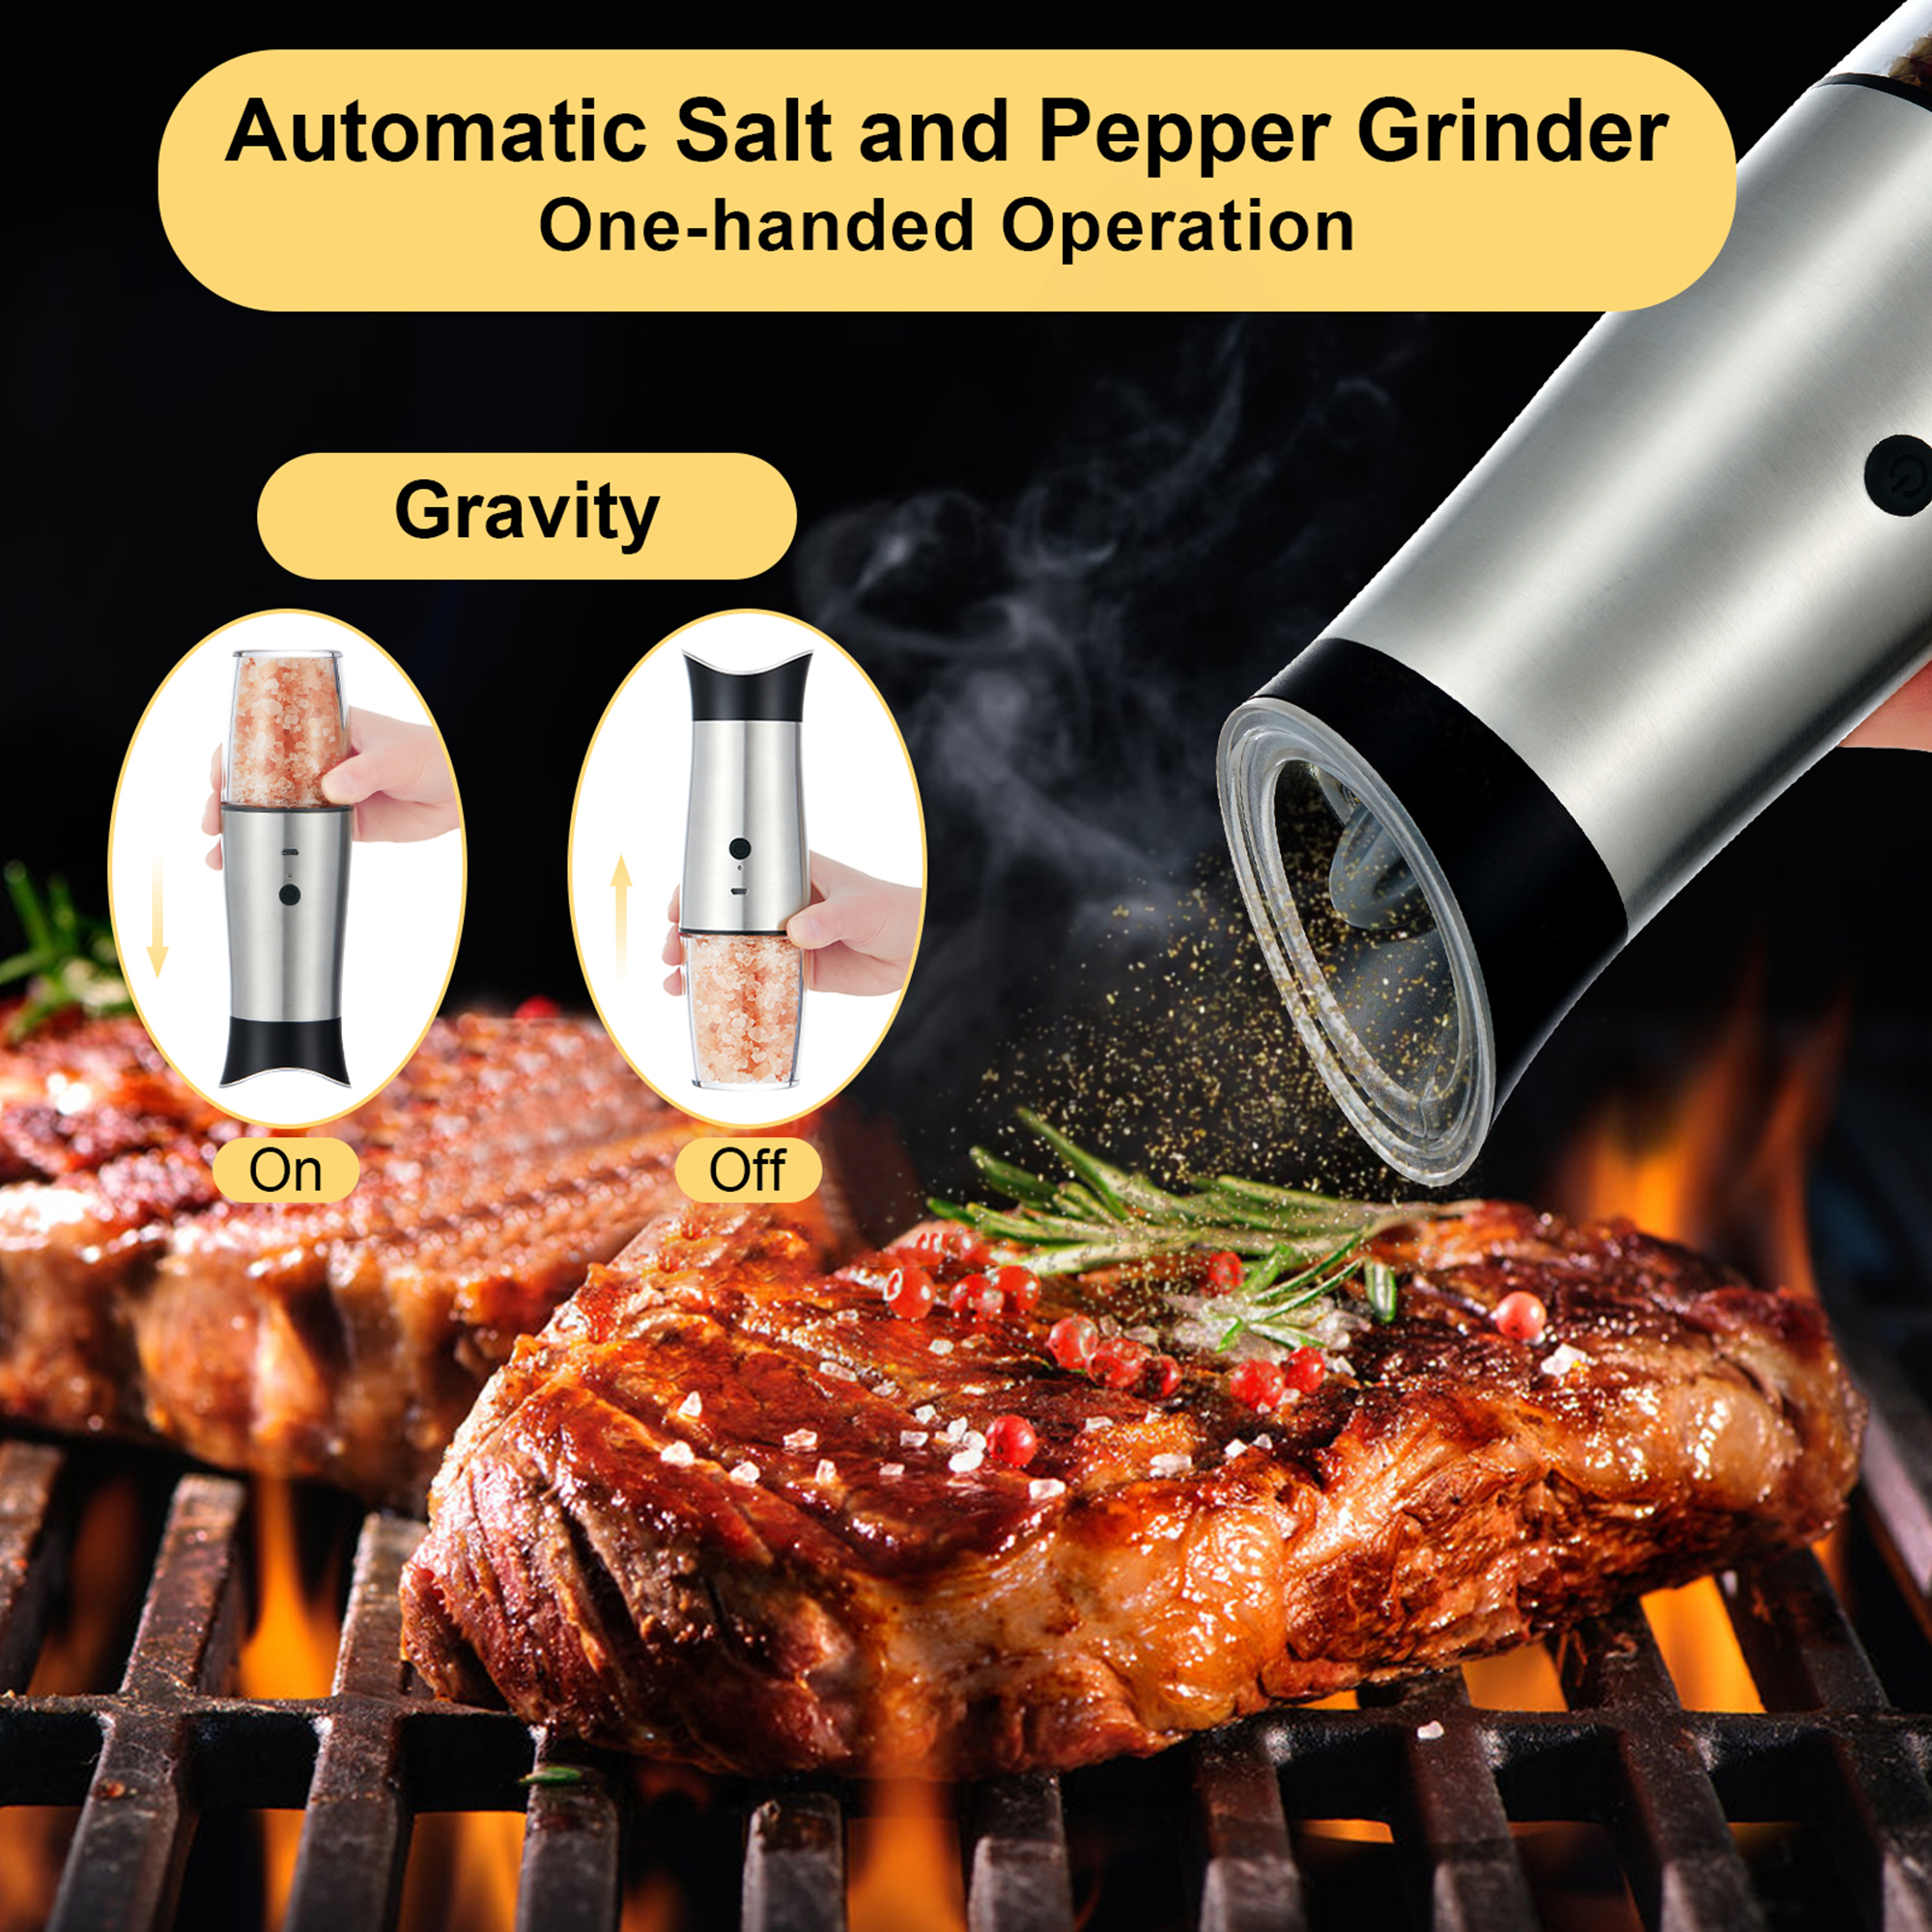 PEPPER GRINDER - Full Review of Chew Fun Electric Gravity Grinder 